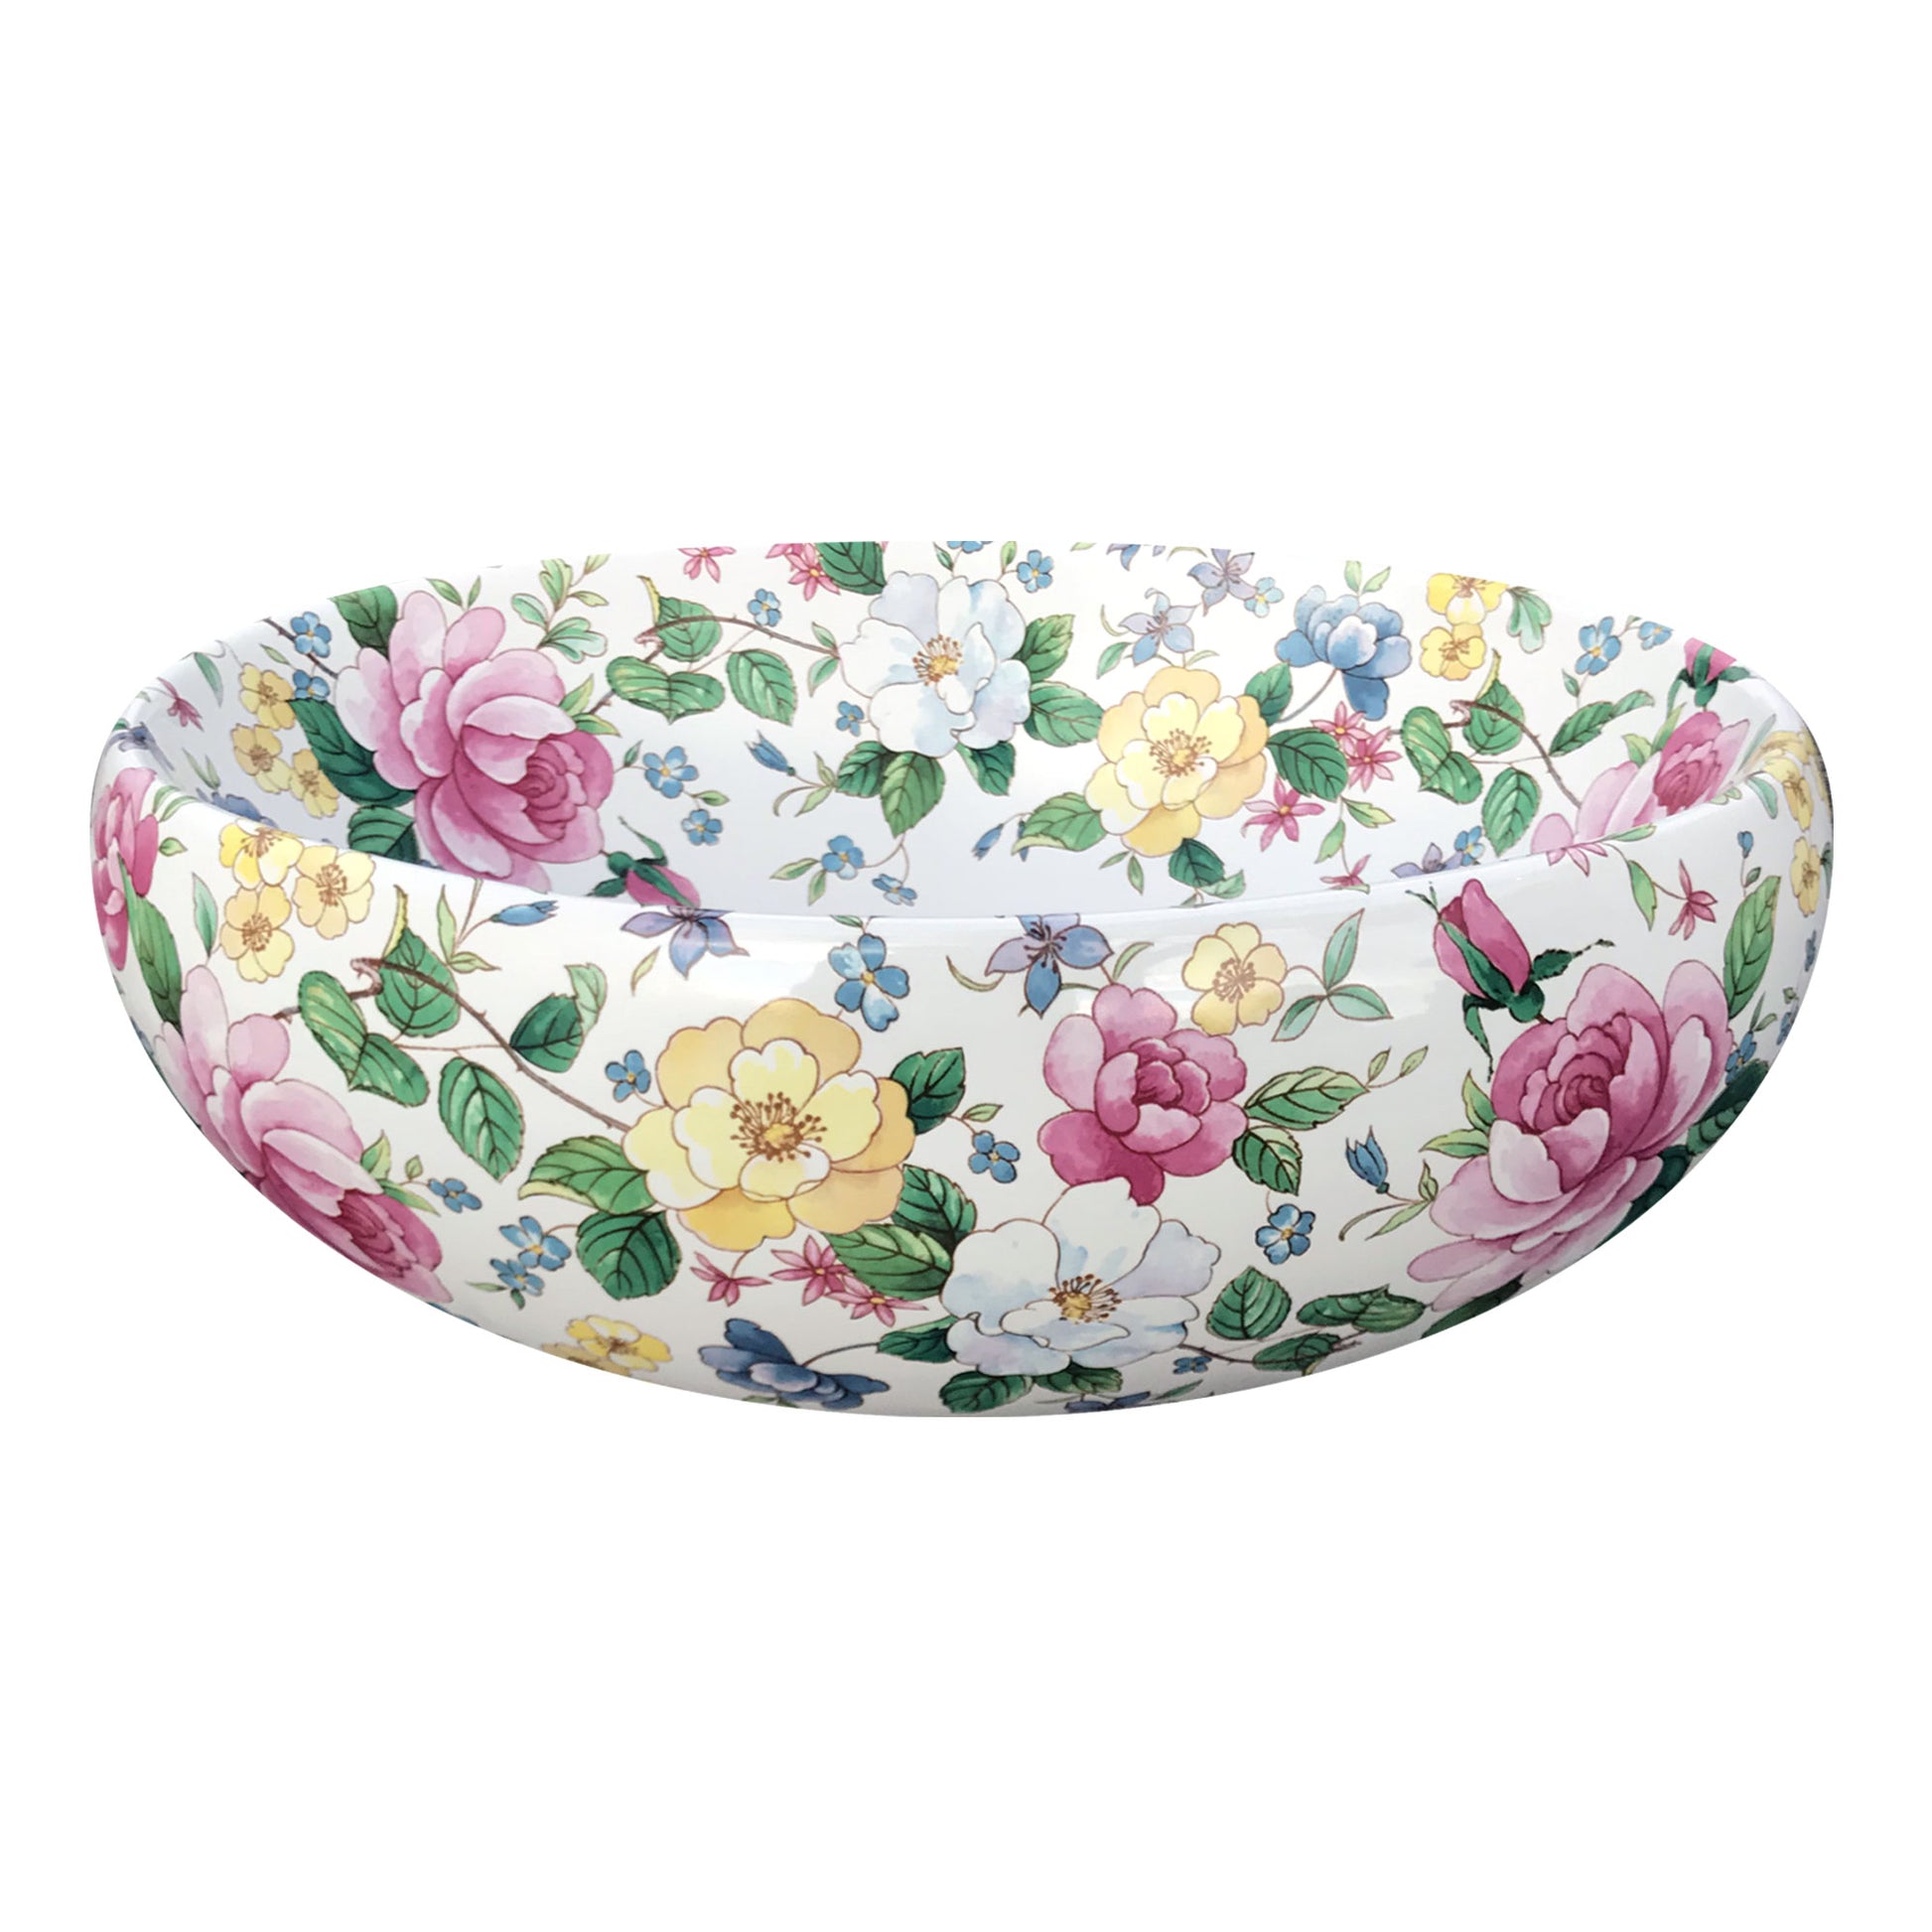 Oval vessel sink painted with Chintz roses design